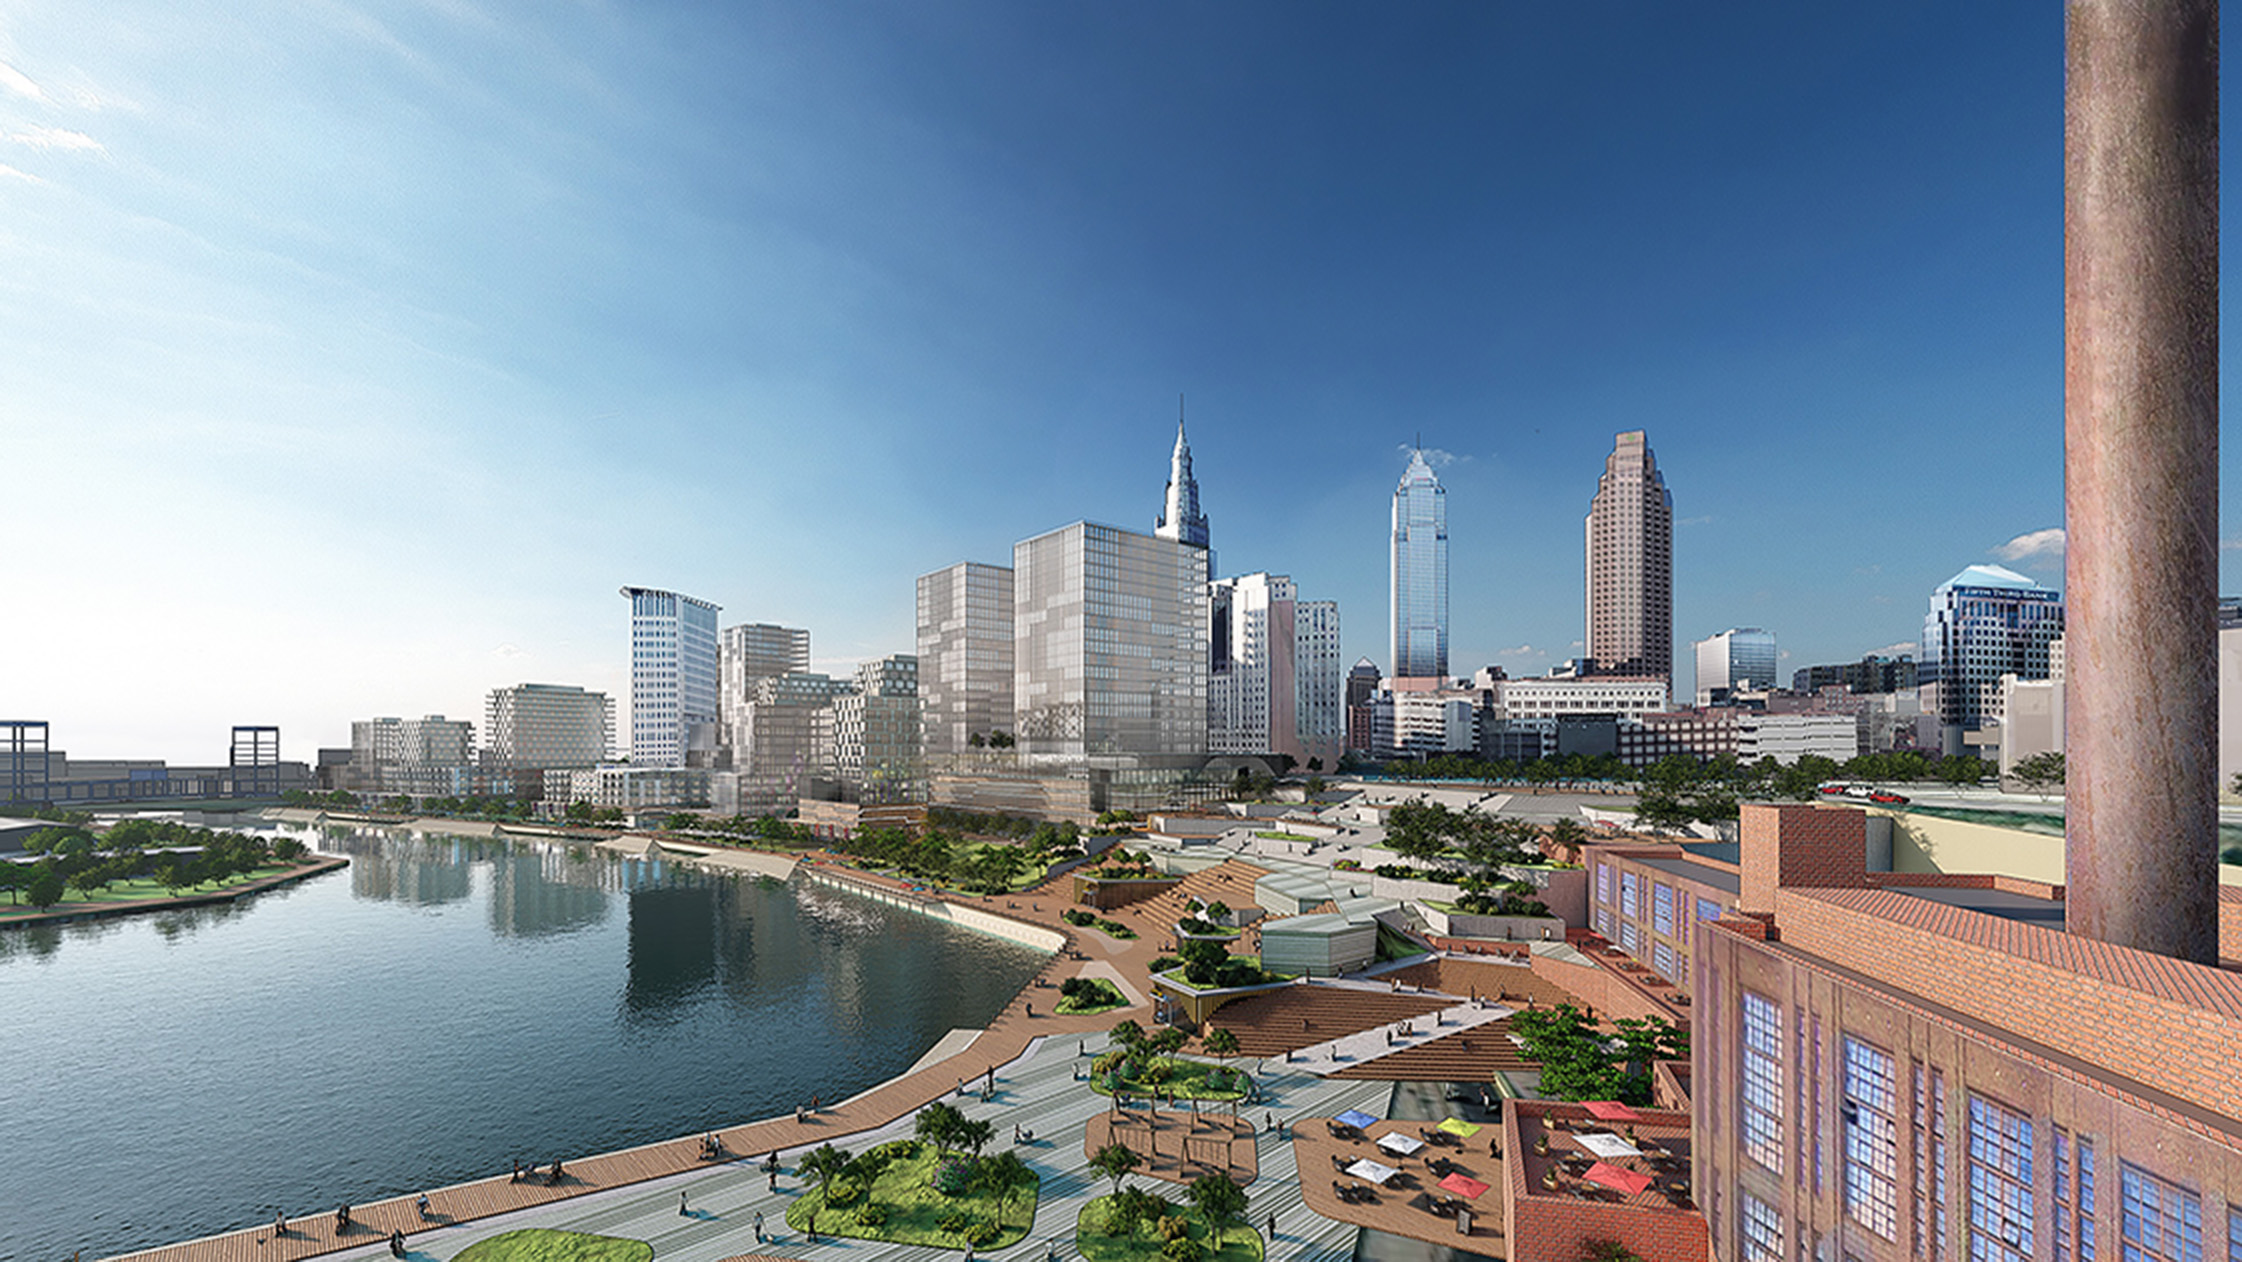 Concept rendering of plazas and new uses along the reimagined Cuyahoga River